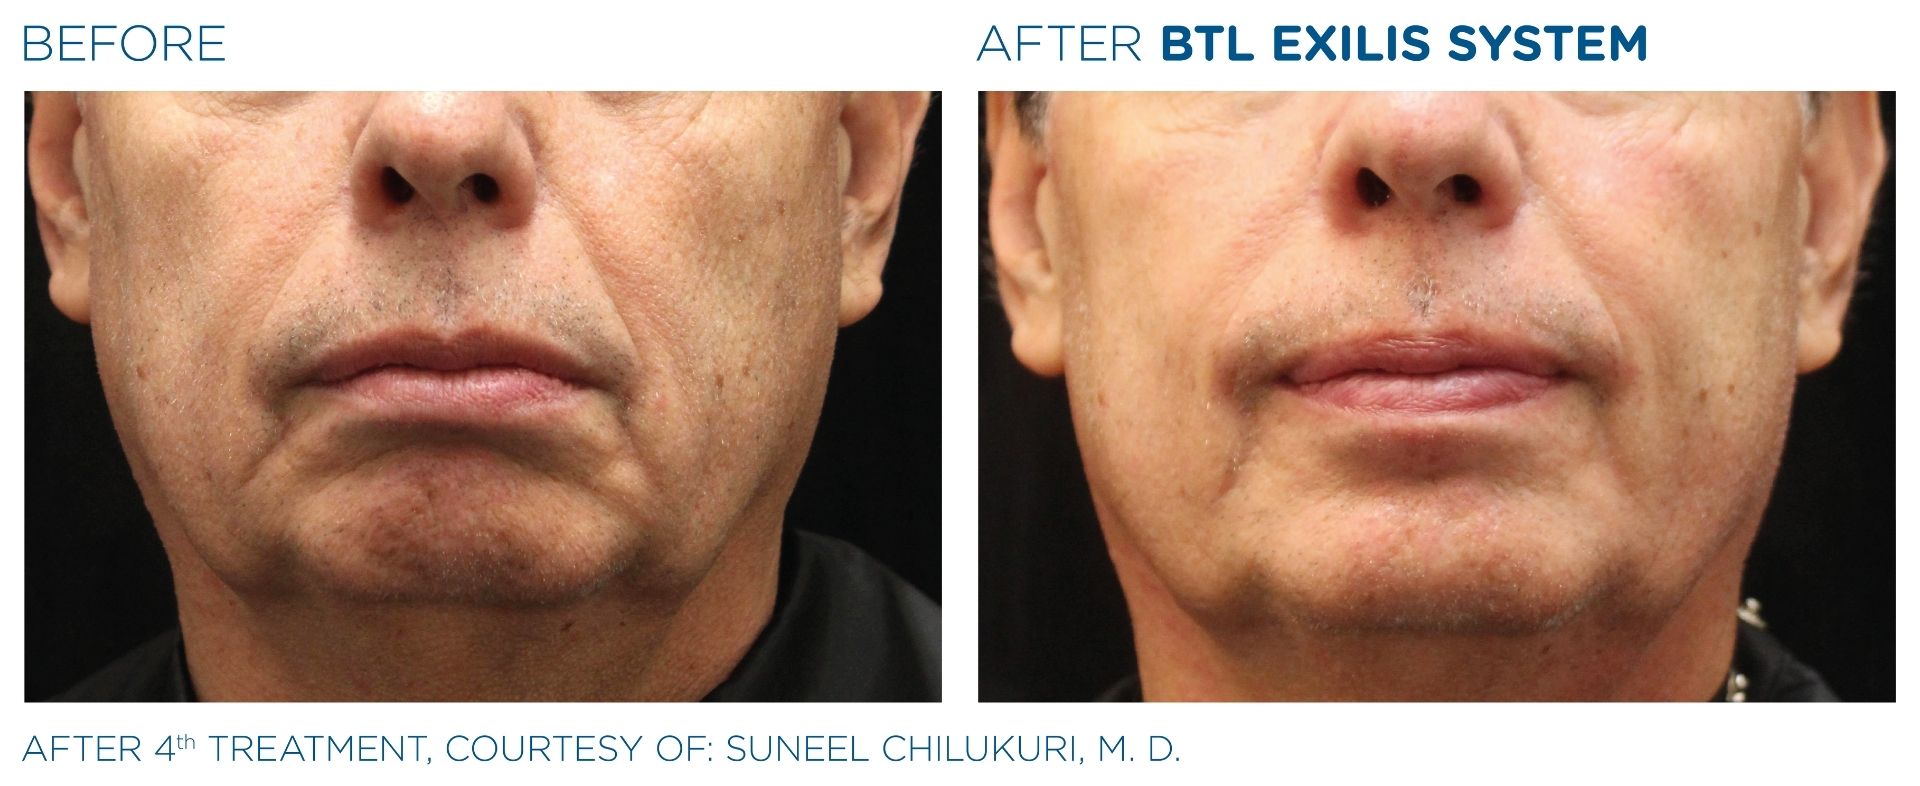 Man's Chin Before & After Using the Exilis System